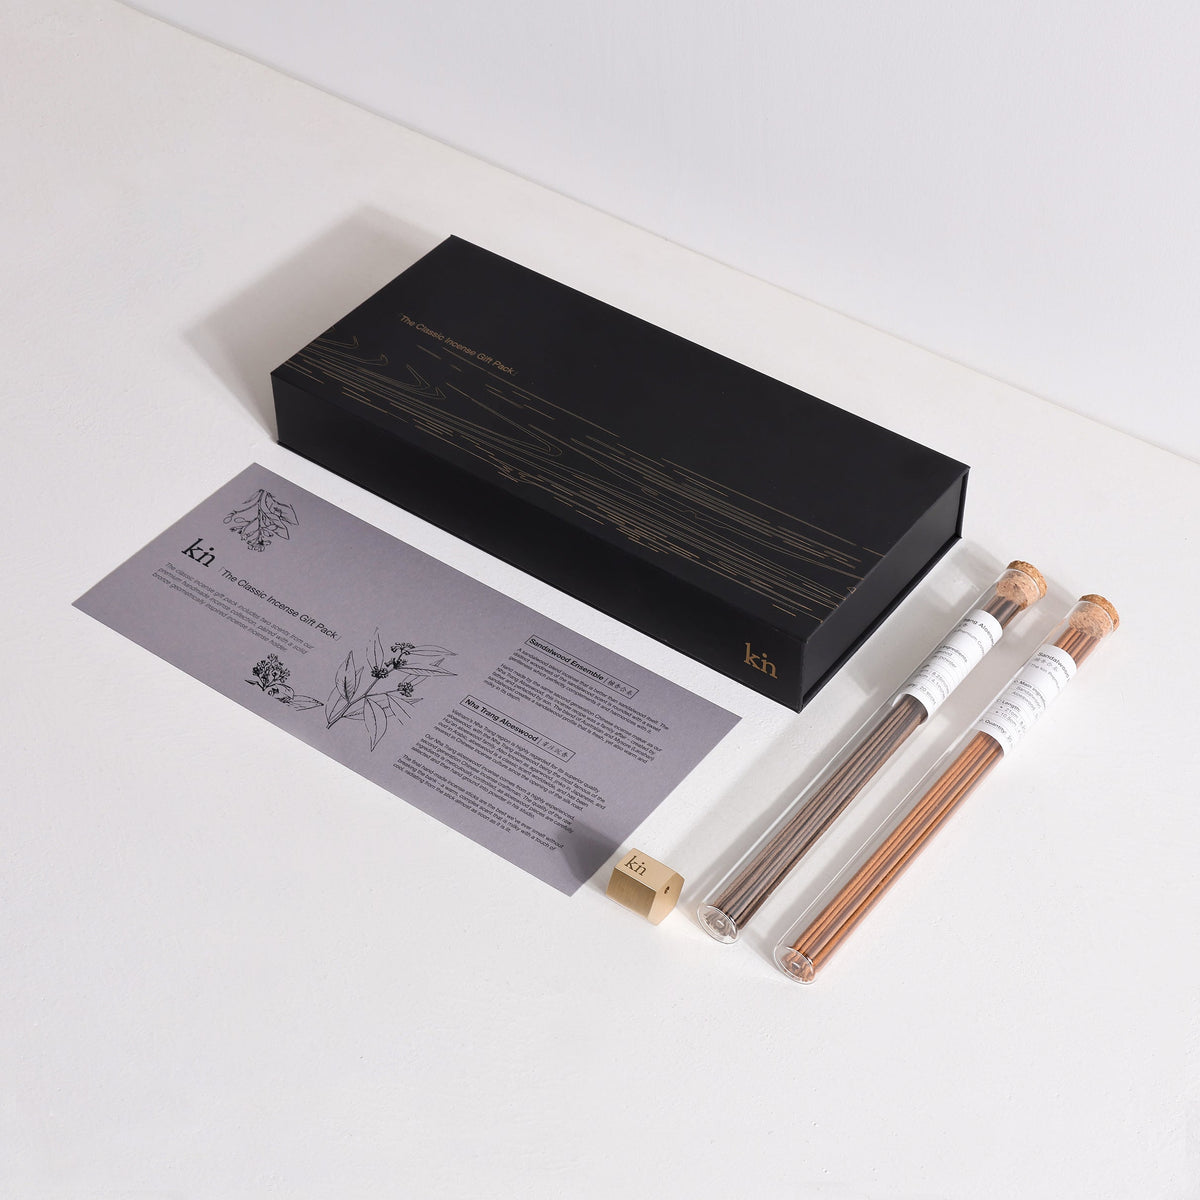 Incense Gift Set with Handmade Sandalwood and Agarwood Incense Sticks on a Table